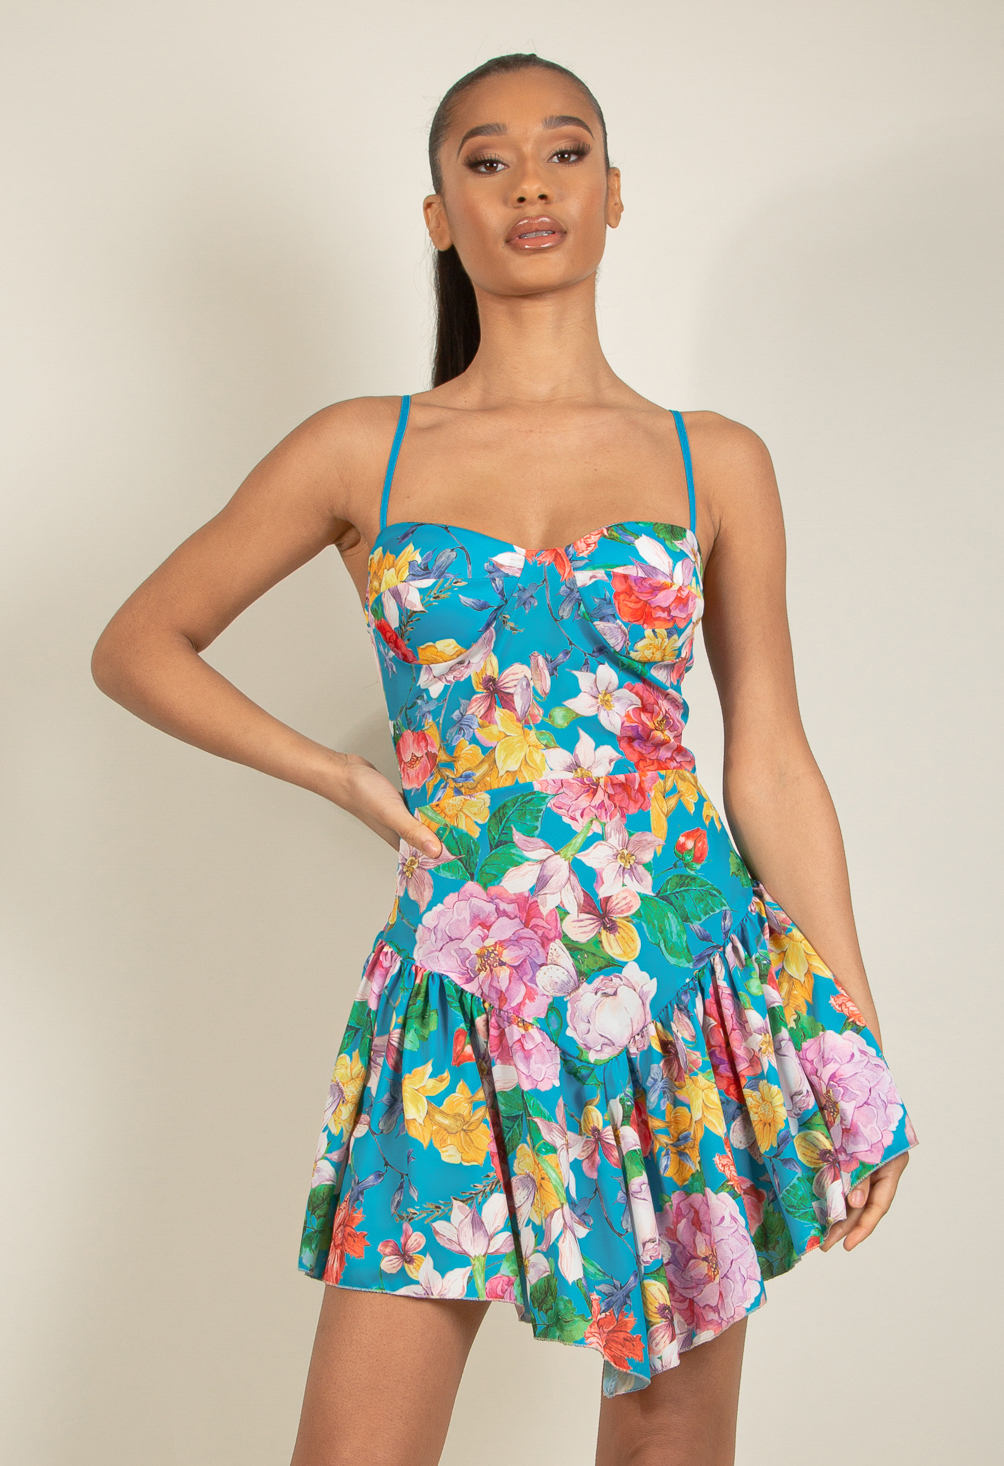 Floral Bustier Mini Dress With Ruffle Hem - Buy Fashion Wholesale in The UK